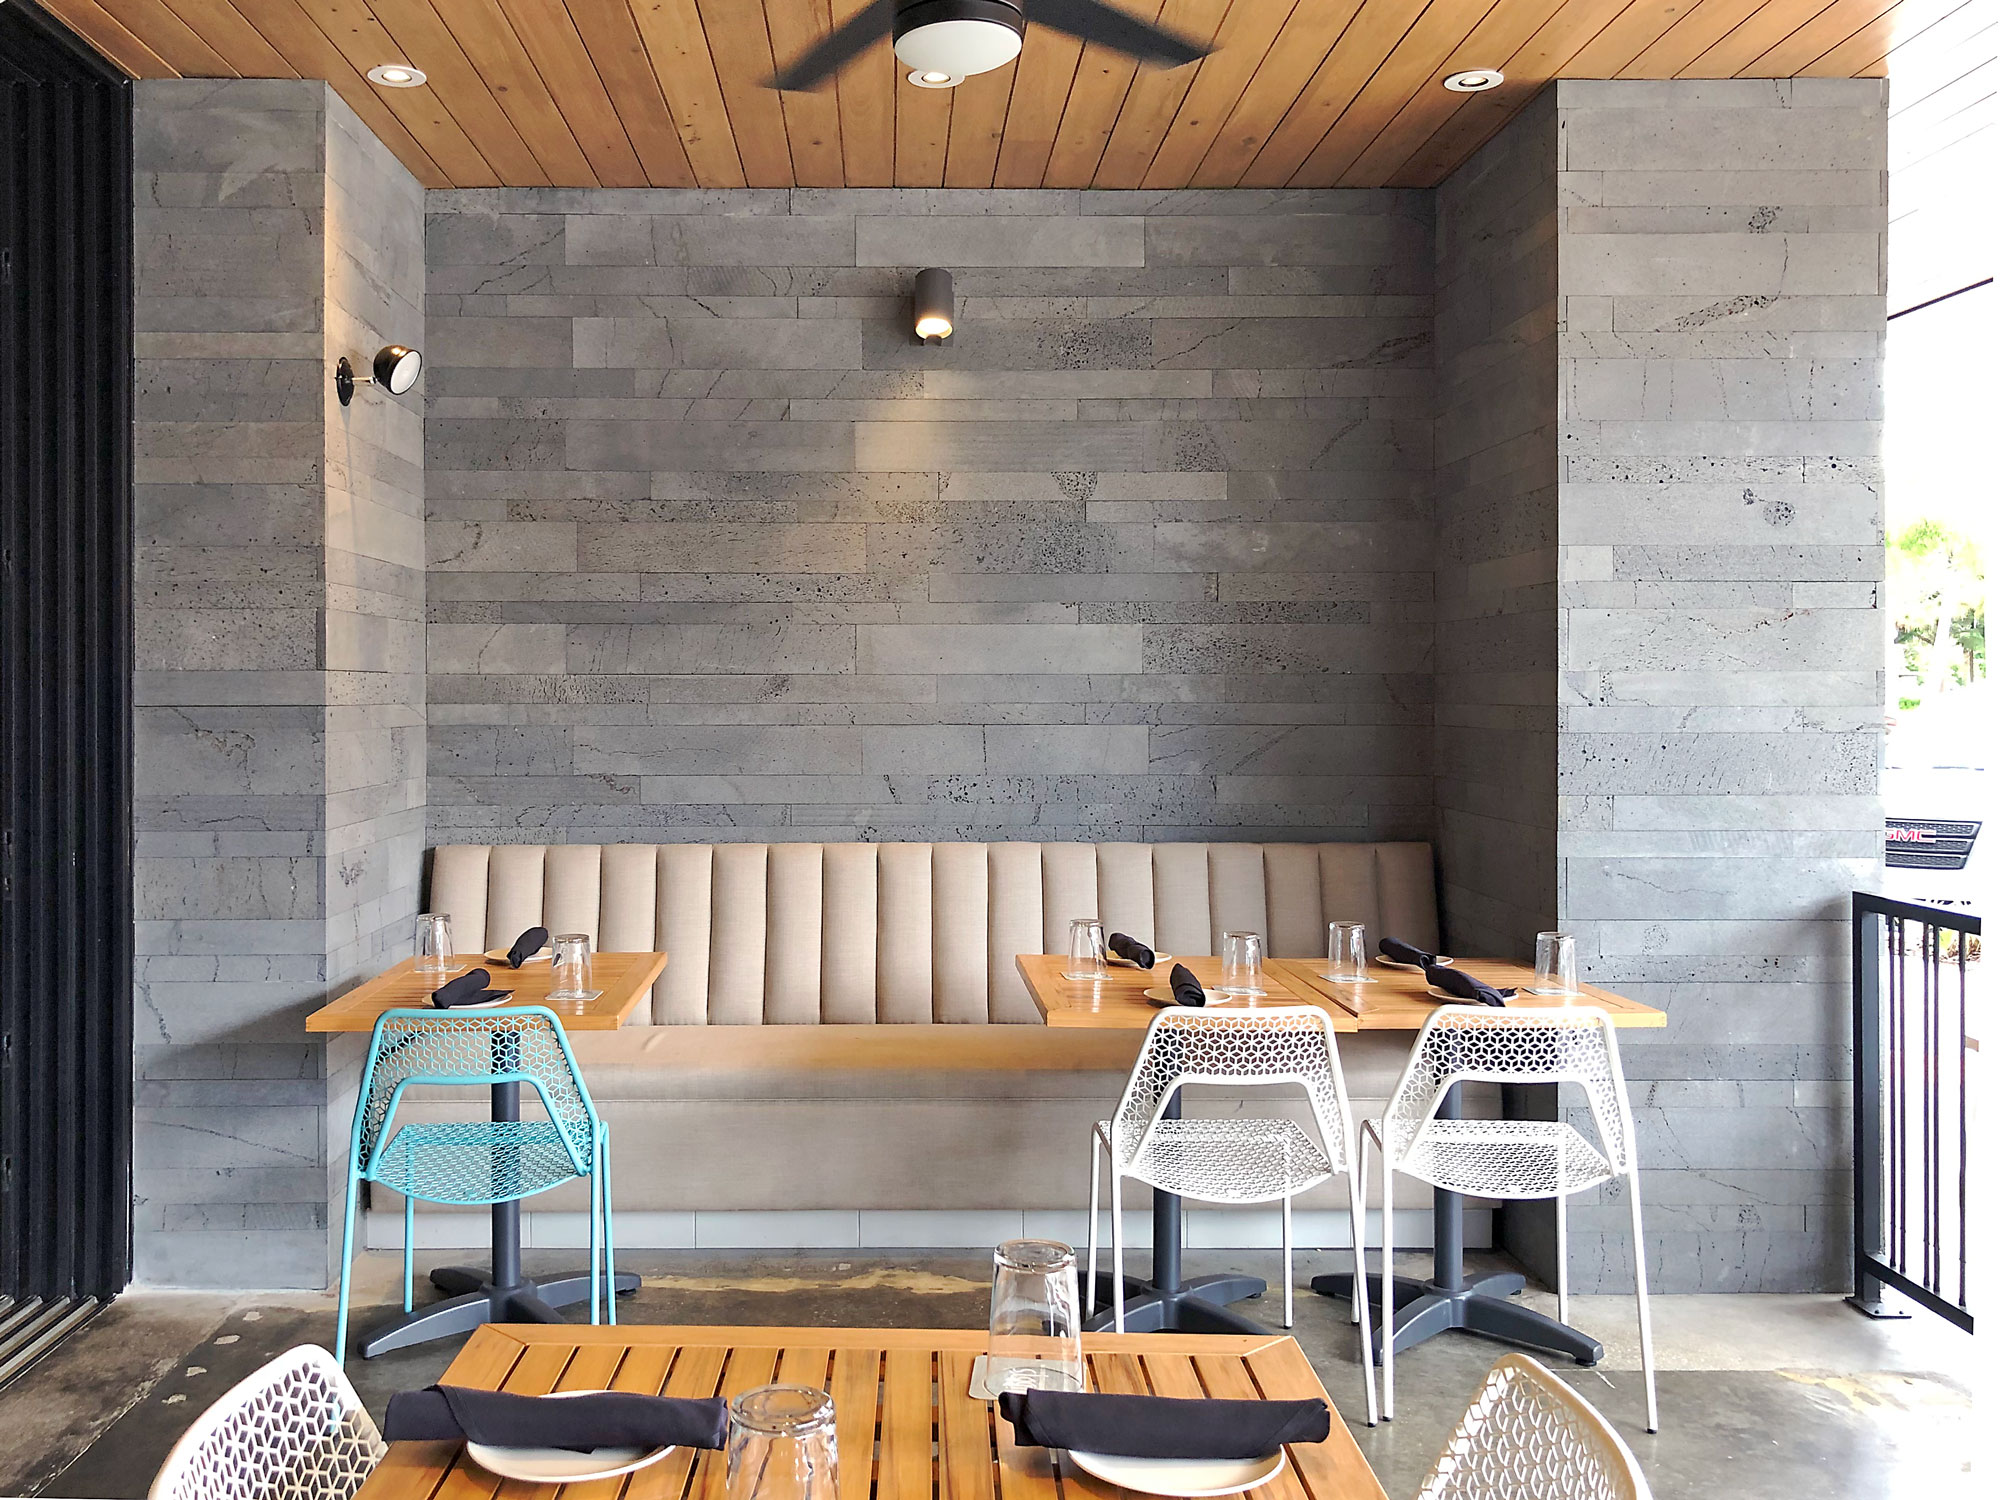 Norstone Platinum Planc Large Format Wall Tile featured in the outside dining area of Libby's restaurant in Sarasota, FL